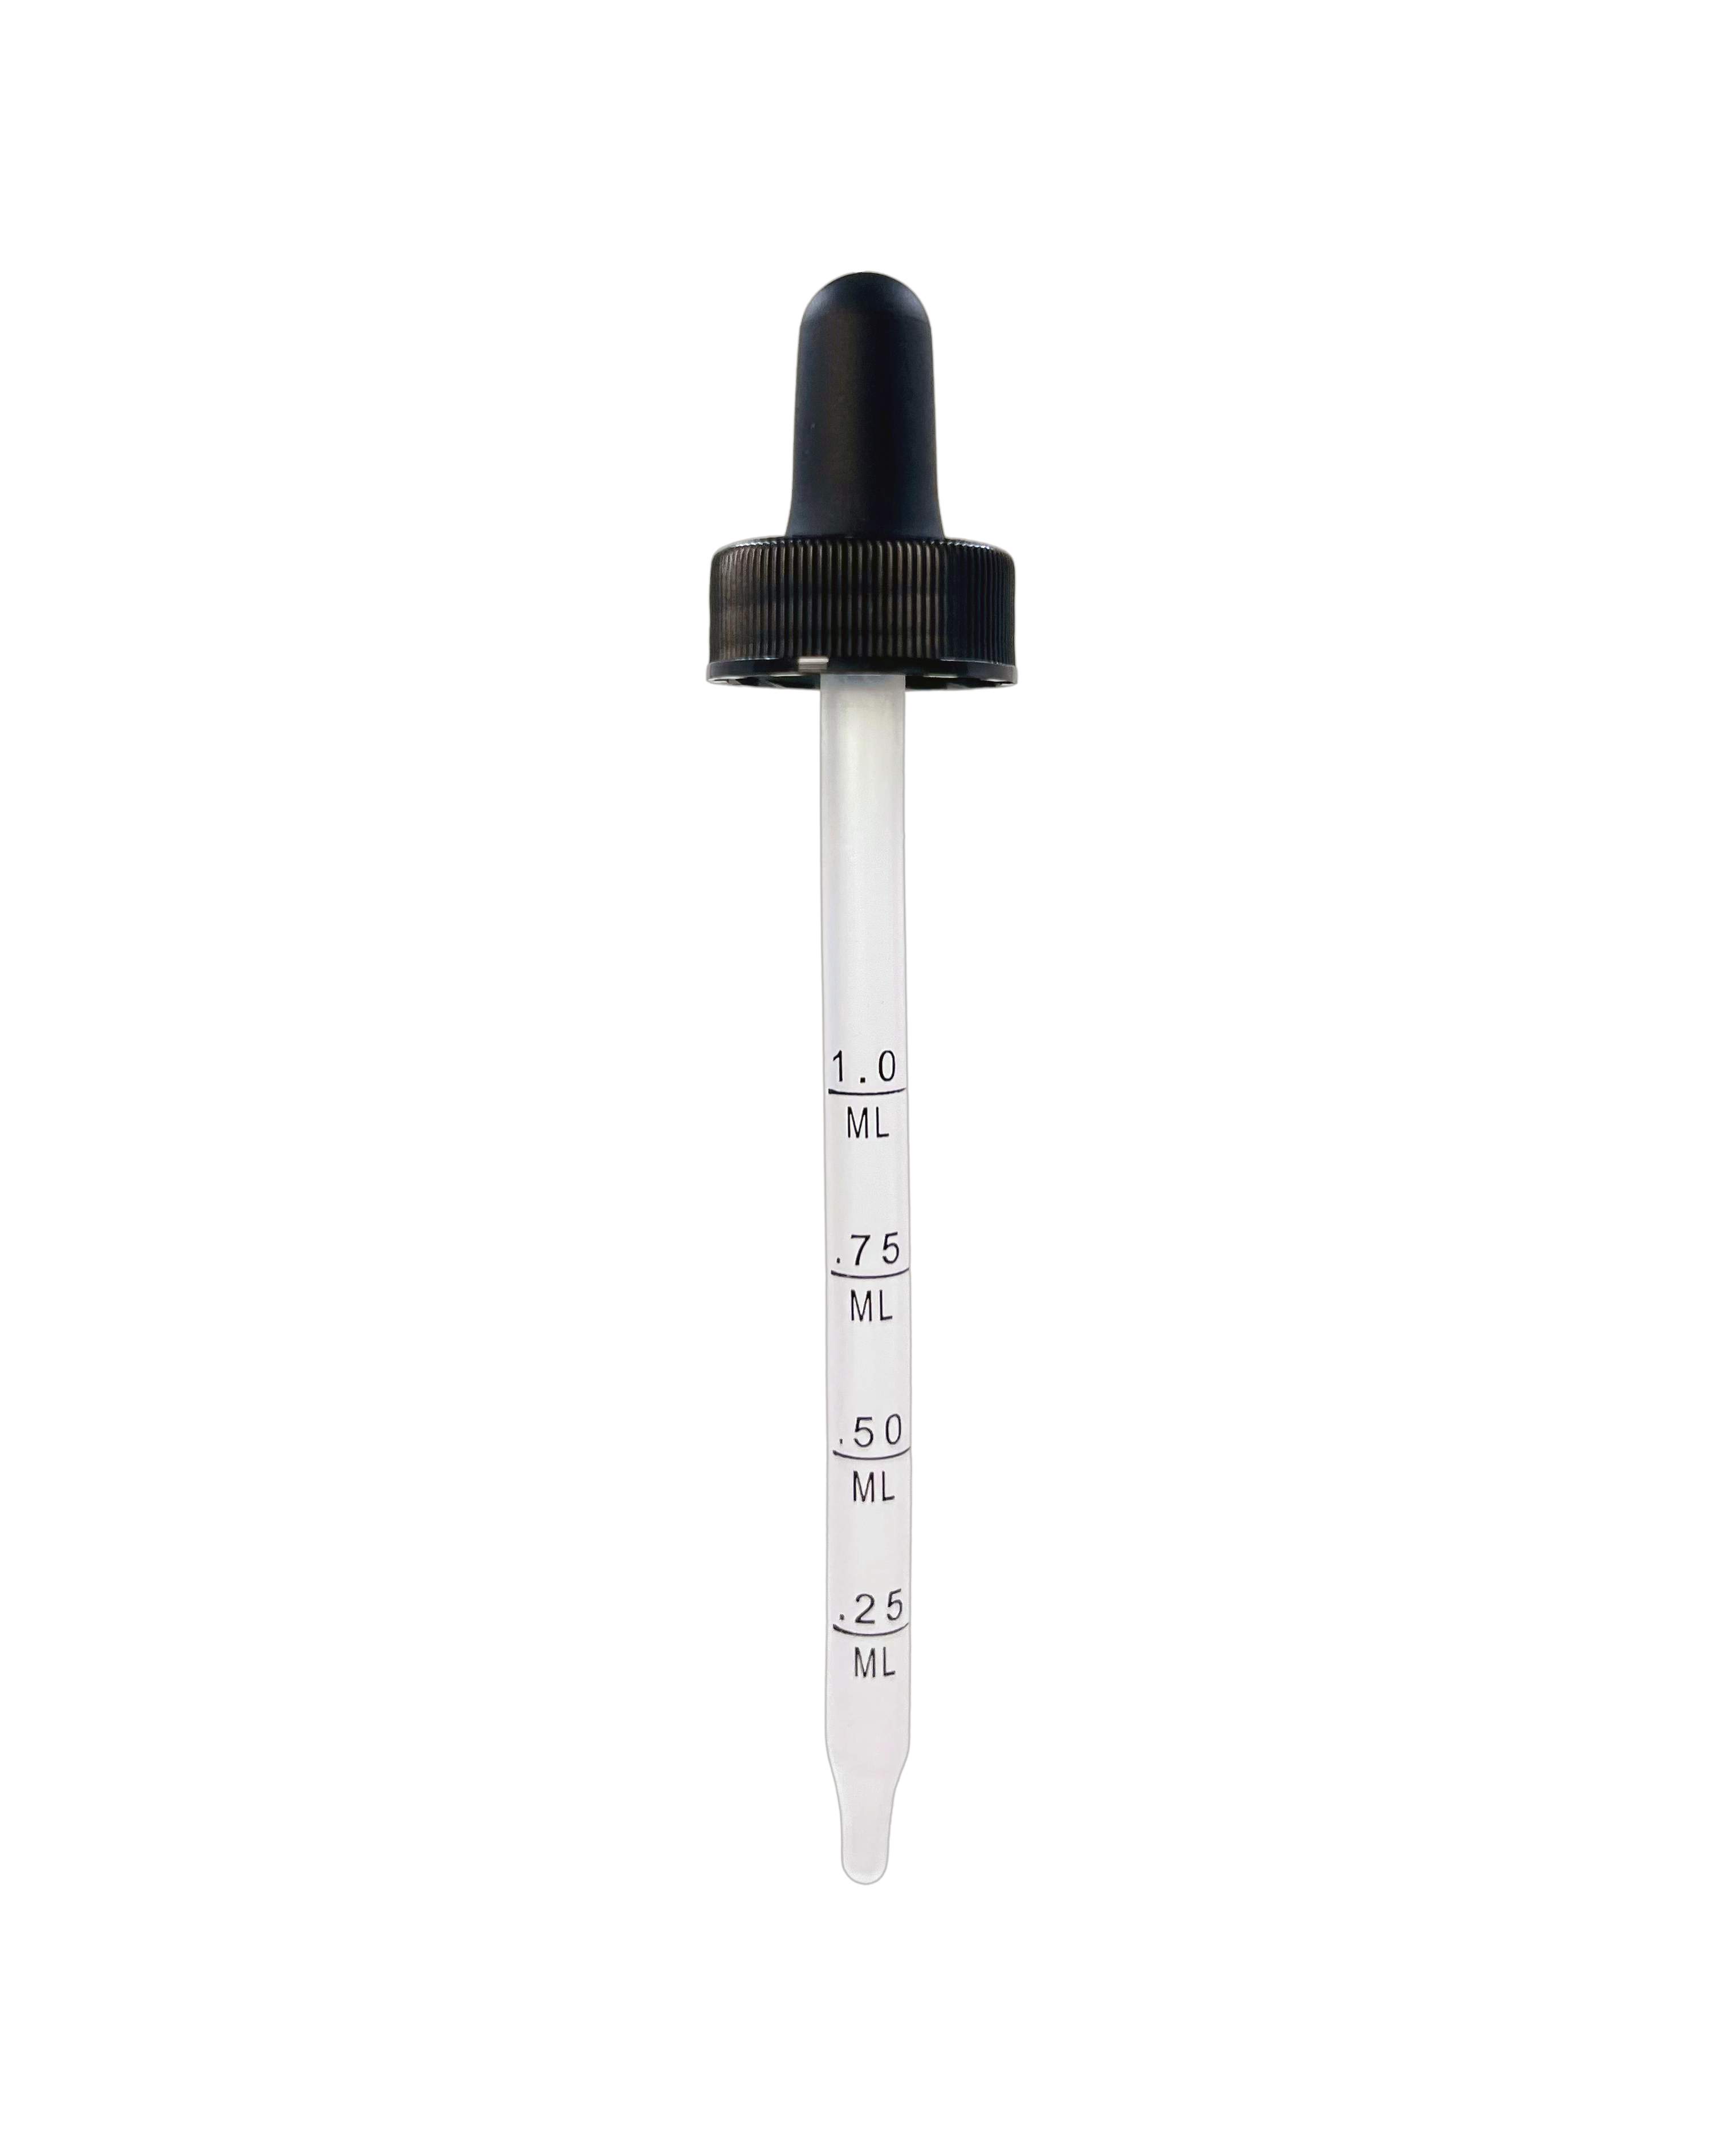 4oz Calibrated LDPE Dropper Assembly